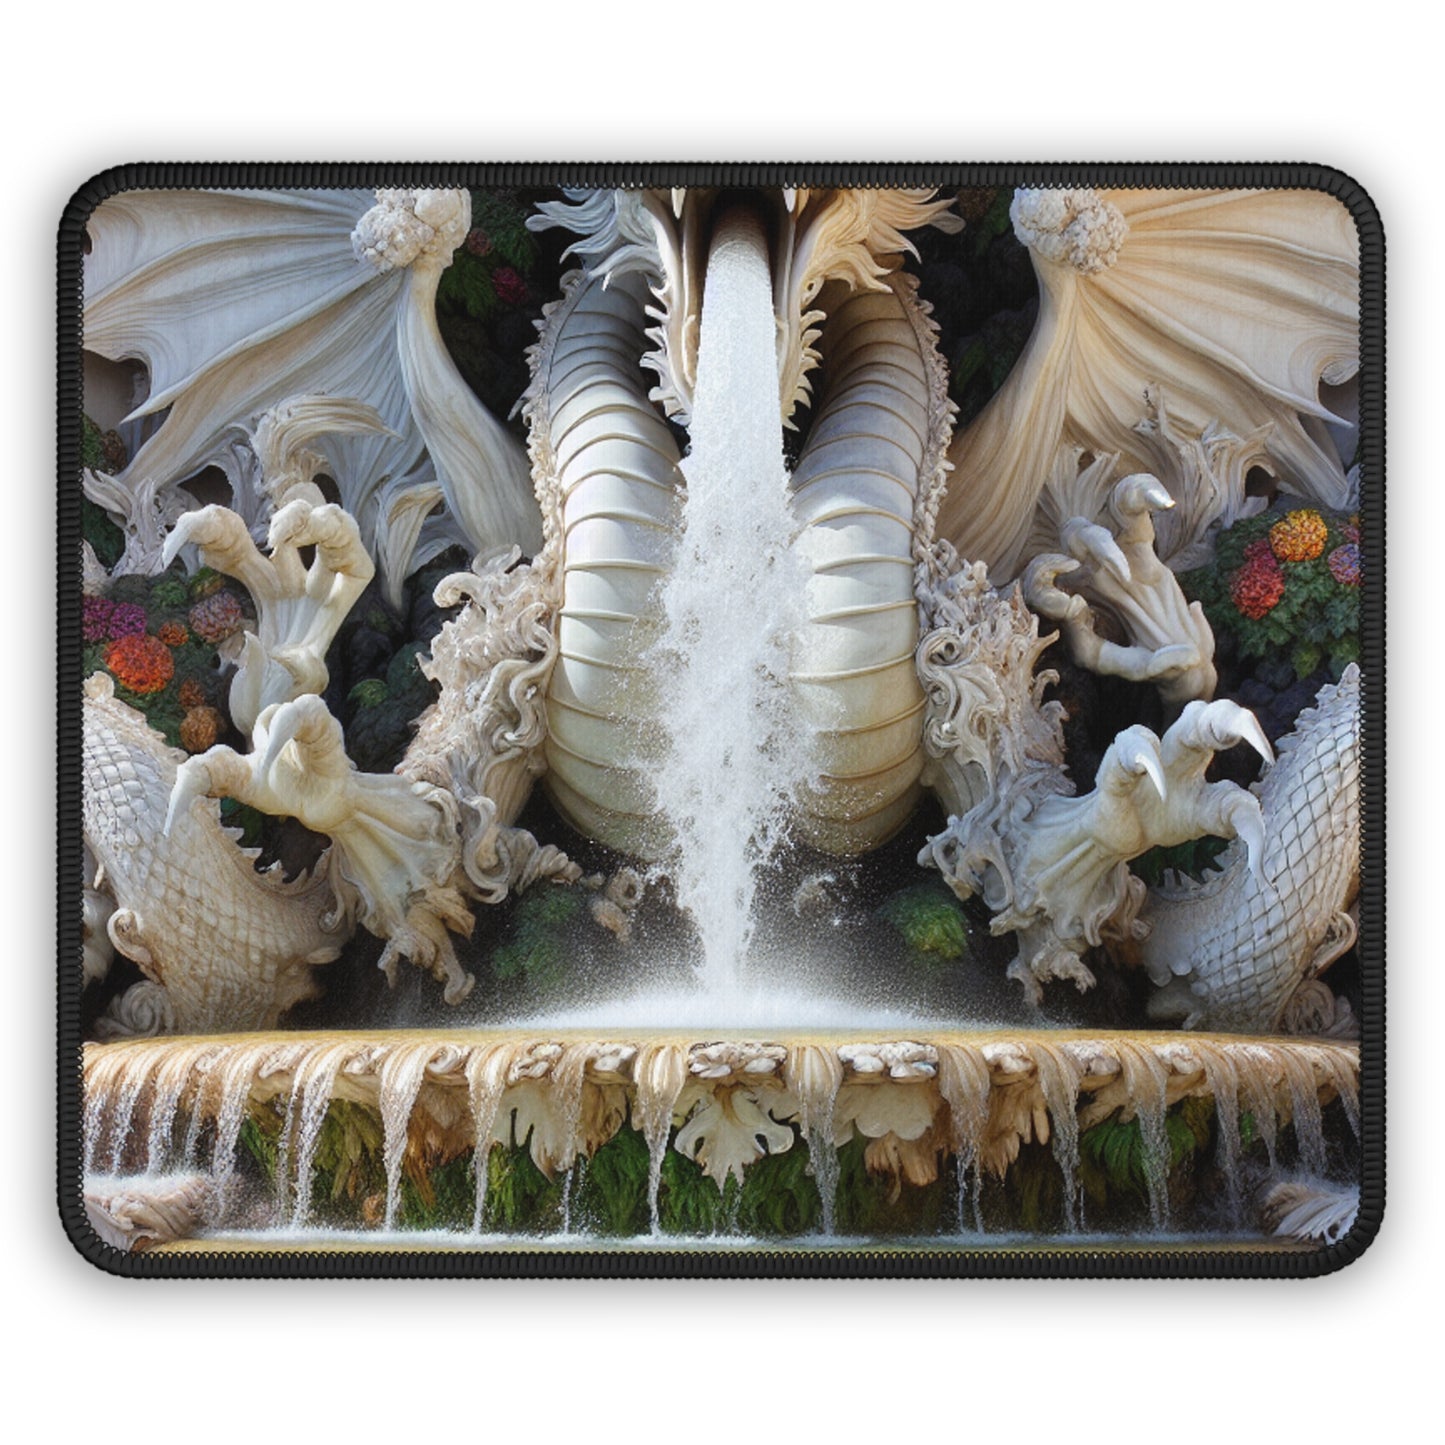 "Fiery Dragon Fountain: Heaven's Cascade" - The Alien Gaming Mouse Pad Rococo Style